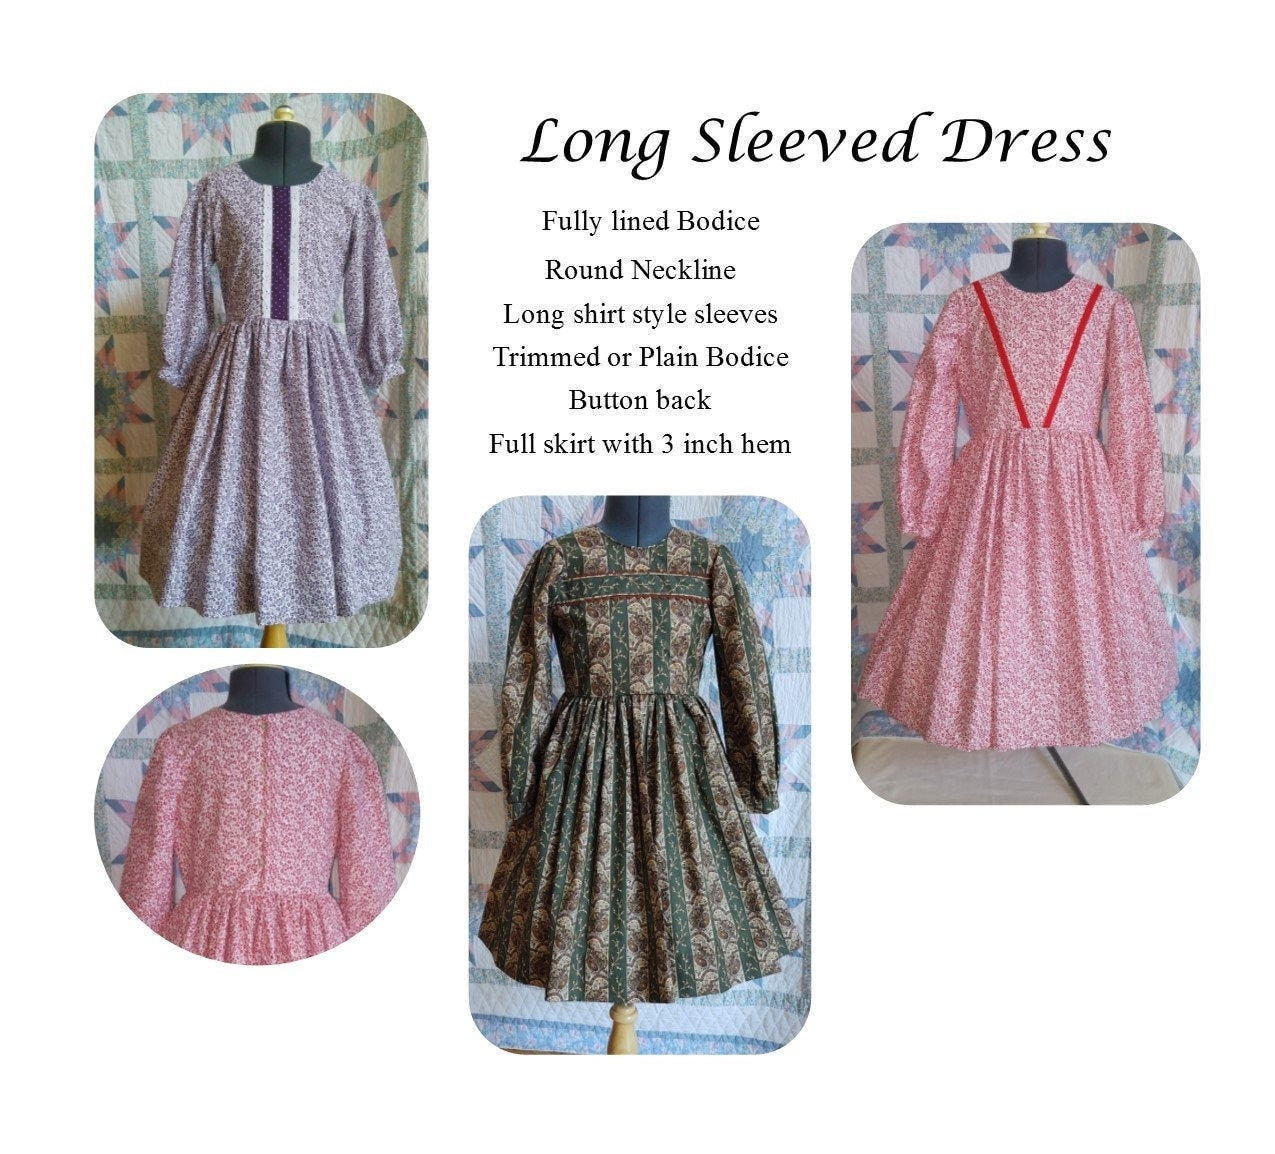 Girl's Long Sleeved Dress, Apron and Bonnet Set - MADE TO ORDER - Victorian, Civil War, Prairie School Days, Old-fashioned, Historical